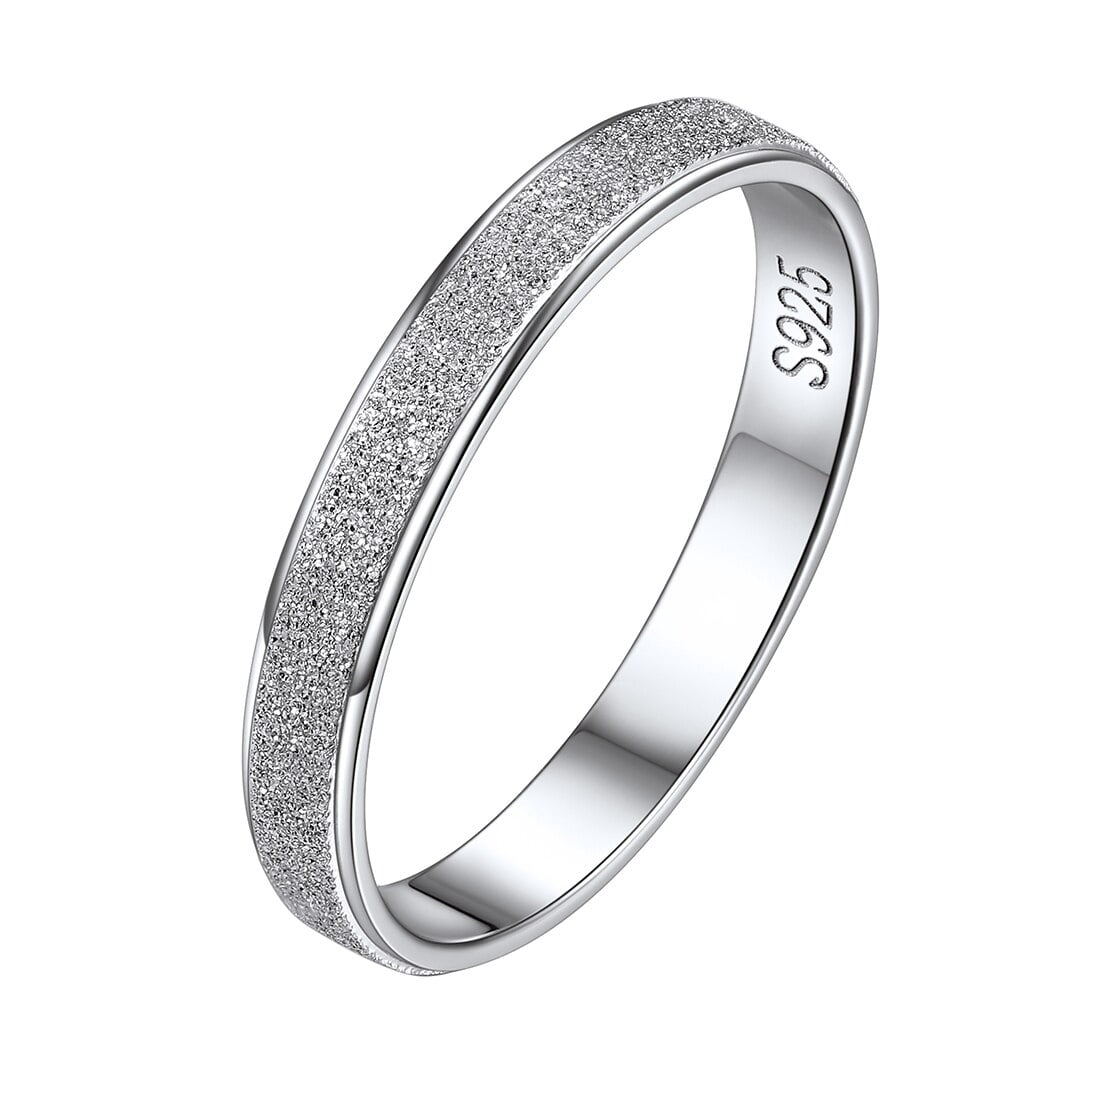 Buy Pure Sterling Silver Rings With Customization Online|Personalized Silver  Rings